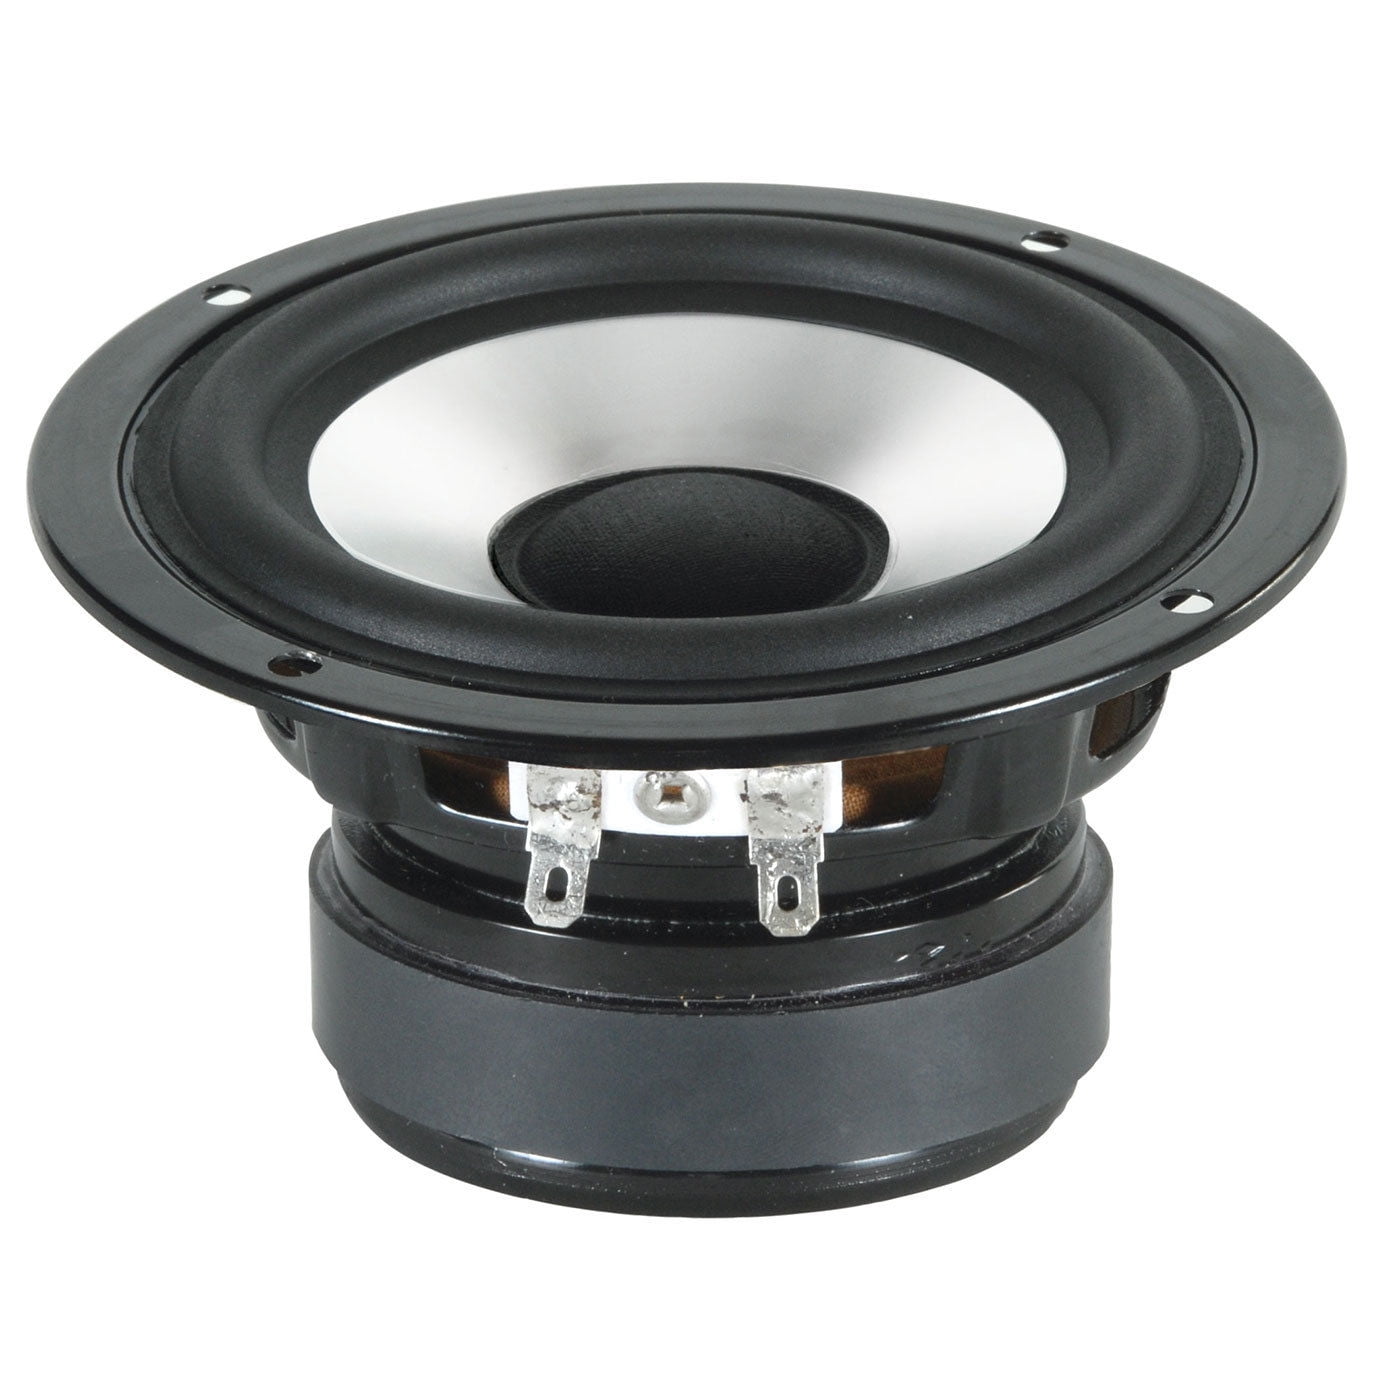 replacing 8 ohm speaker with 4 ohm